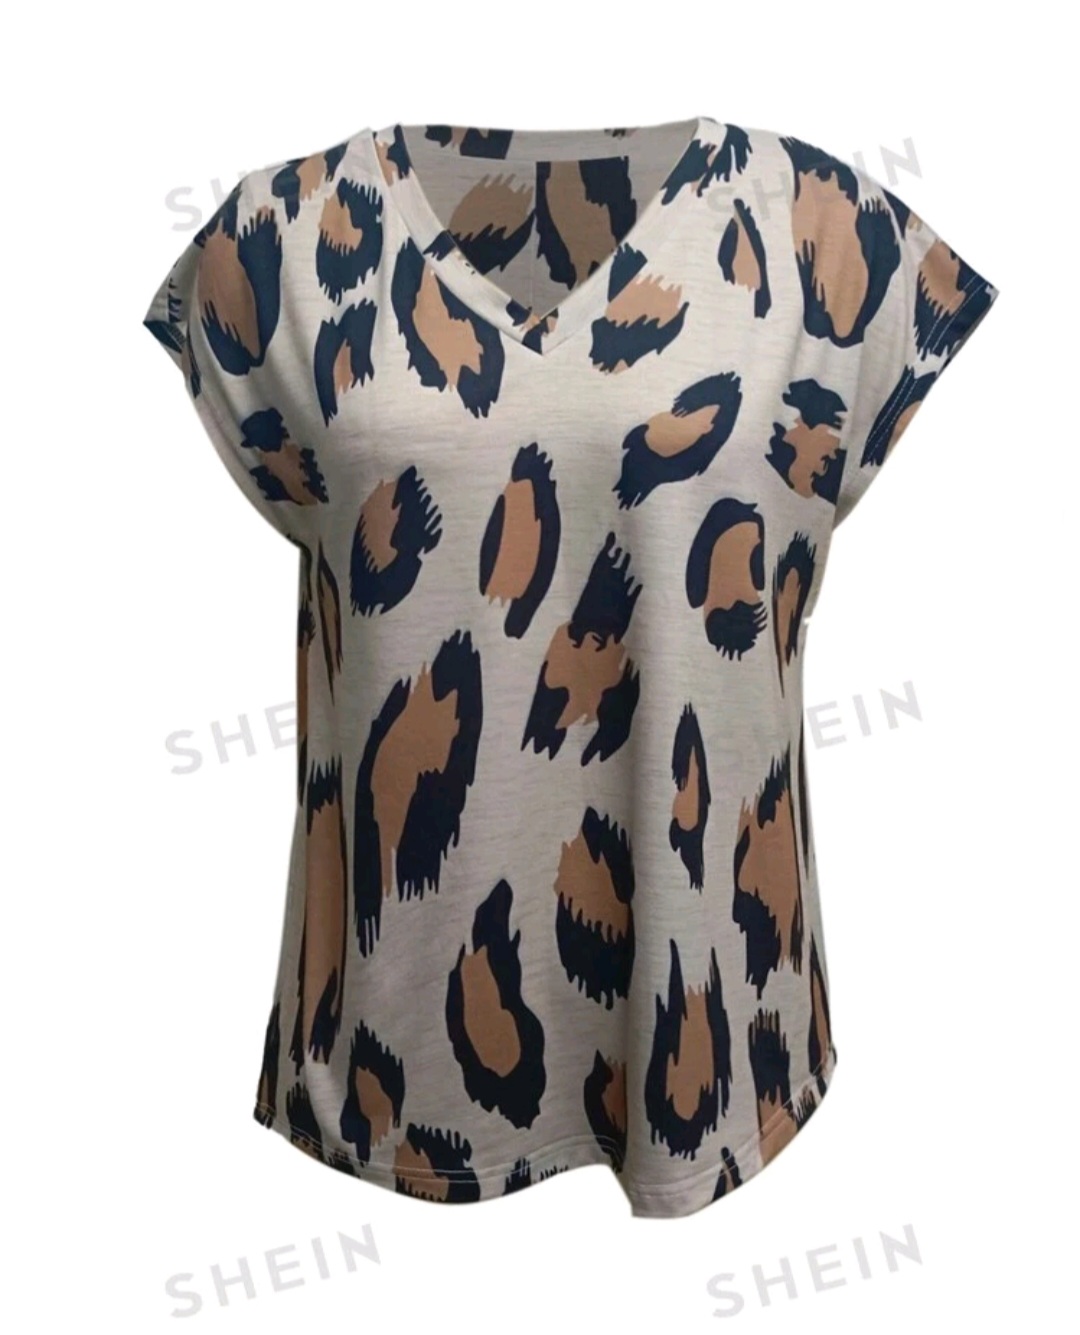 SHEIN LUNE Women's V-Neck Short Sleeve Casual T-Shirt With Leopard Print, Summer